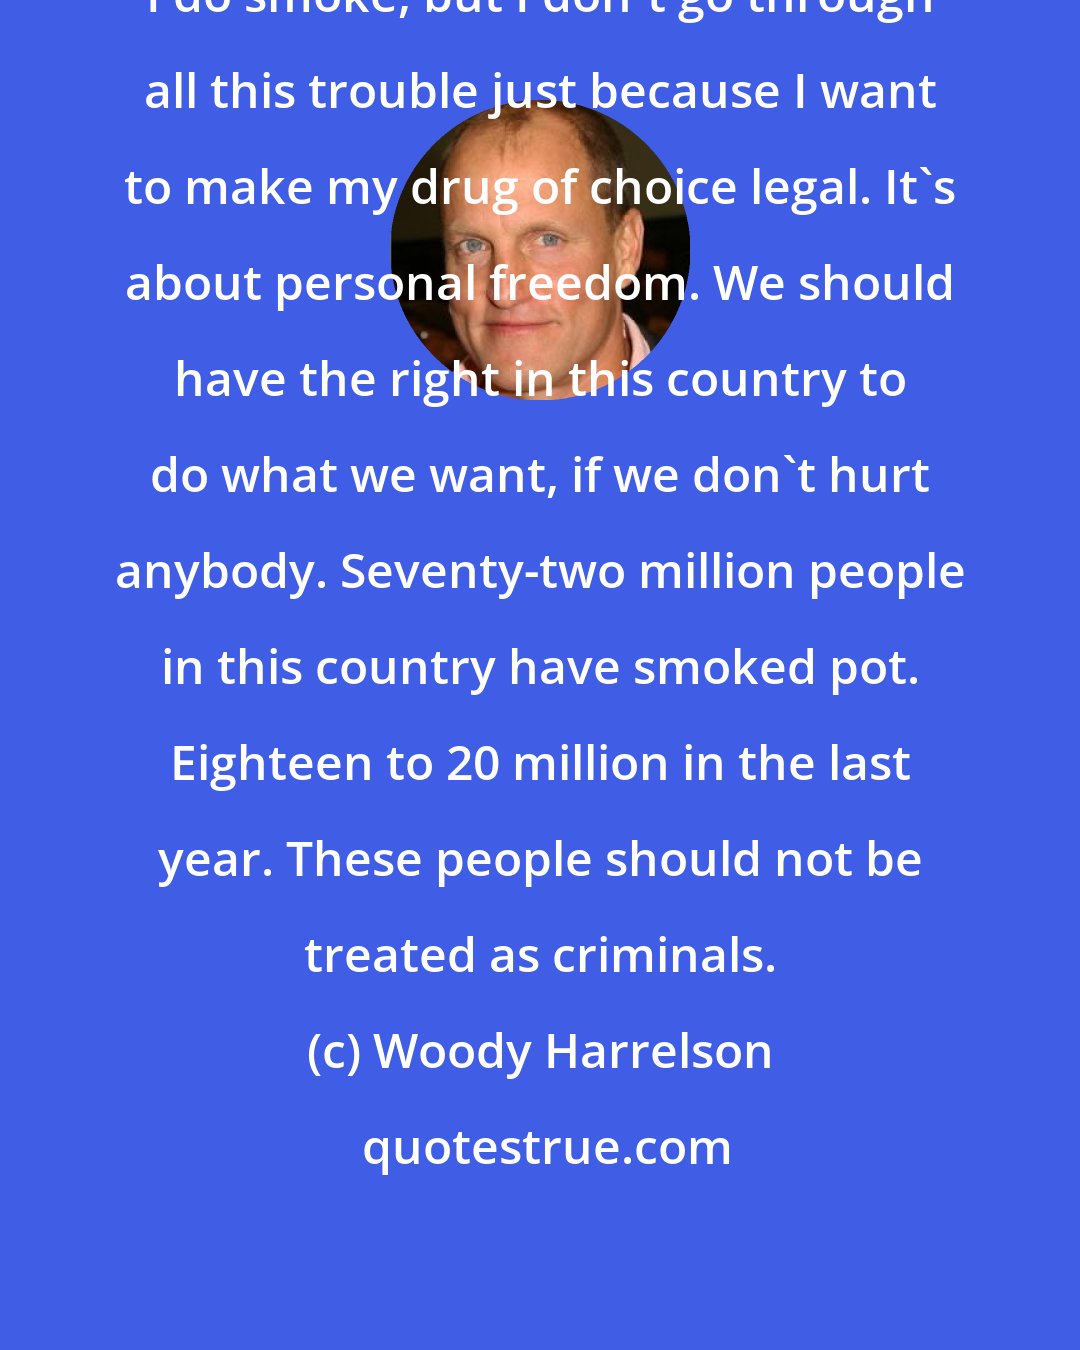 Woody Harrelson: I do smoke, but I don't go through all this trouble just because I want to make my drug of choice legal. It's about personal freedom. We should have the right in this country to do what we want, if we don't hurt anybody. Seventy-two million people in this country have smoked pot. Eighteen to 20 million in the last year. These people should not be treated as criminals.